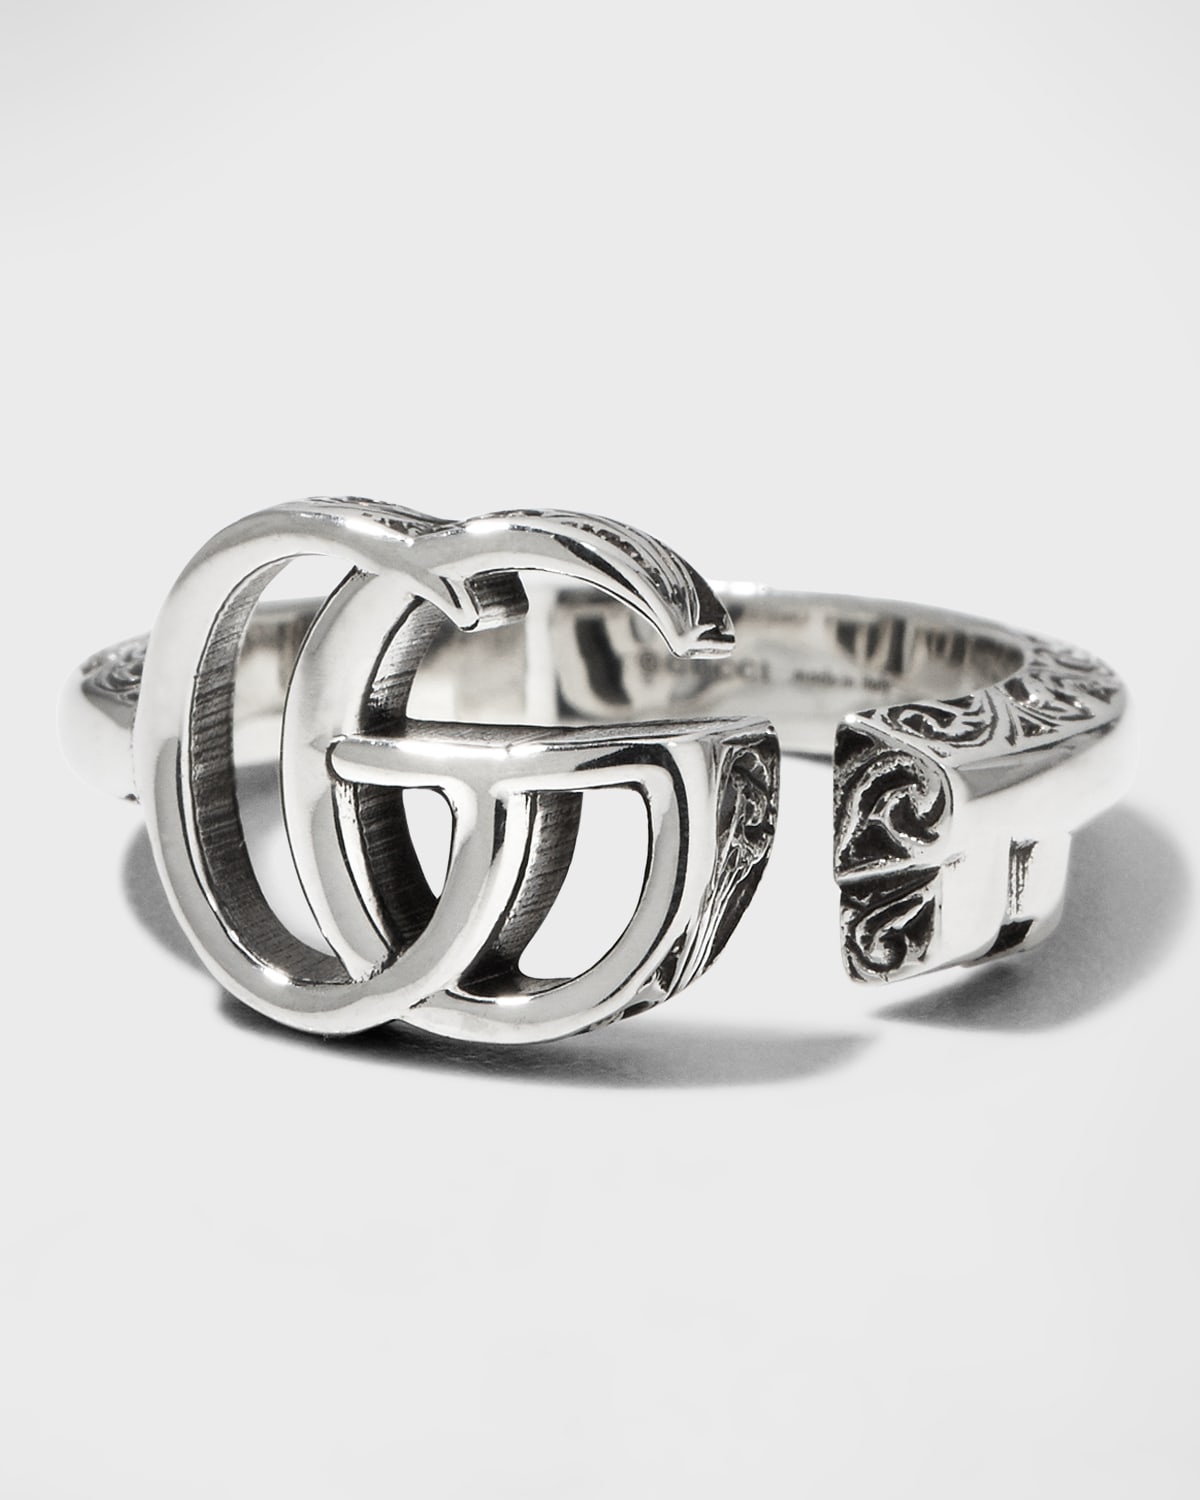 GG Marmont Key Sterling Silver Ring